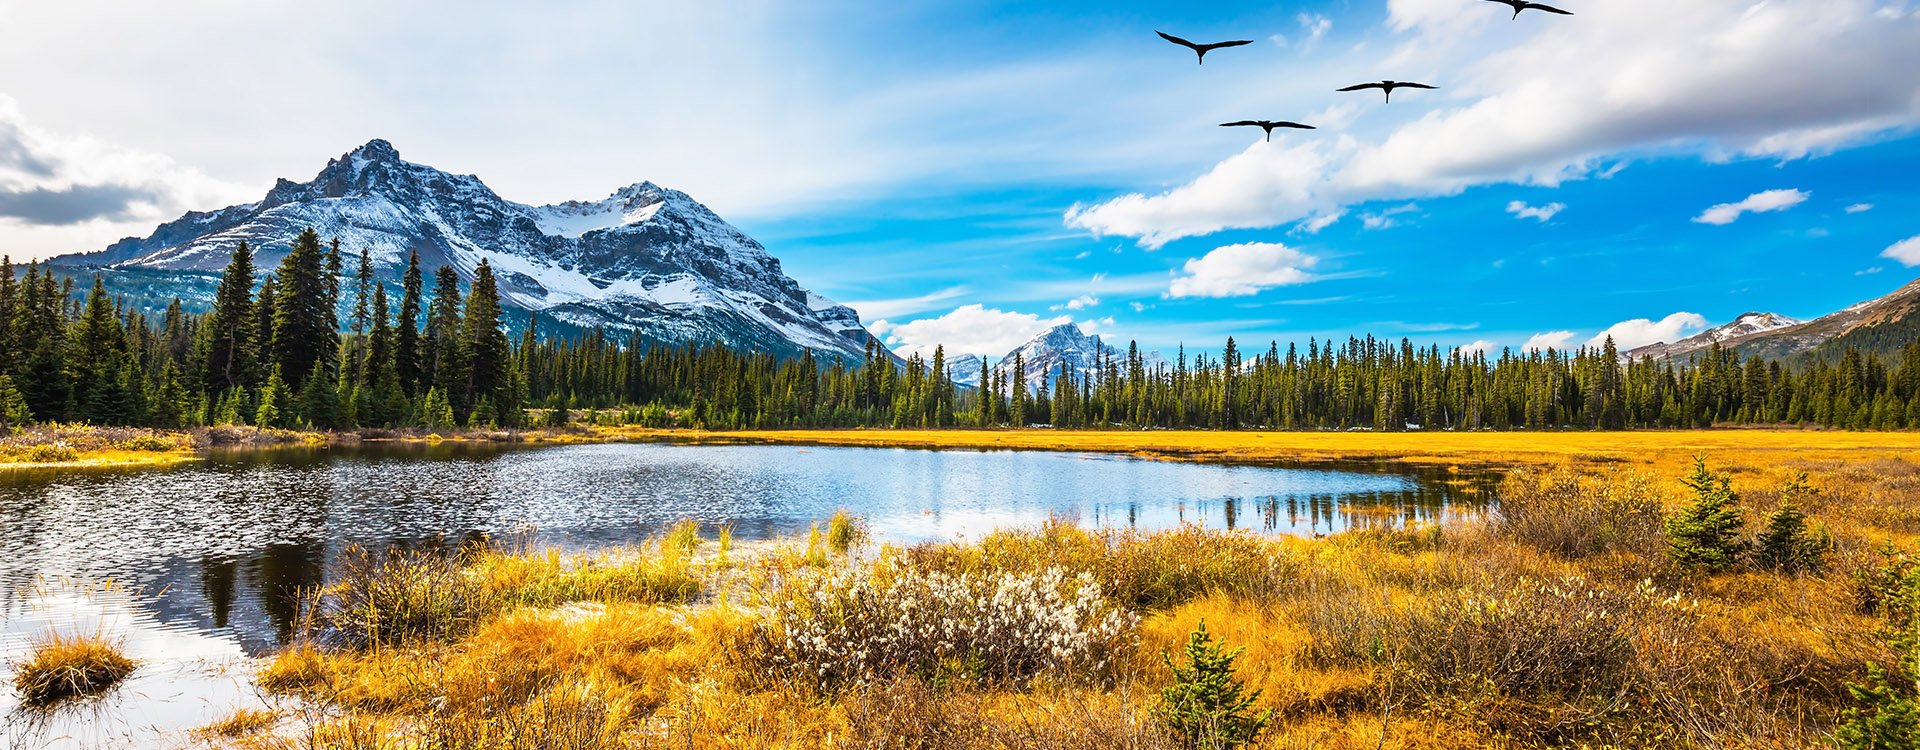 Flock of birds flying over the autumn valley. Waterlogged valley in the Canadian Rockies